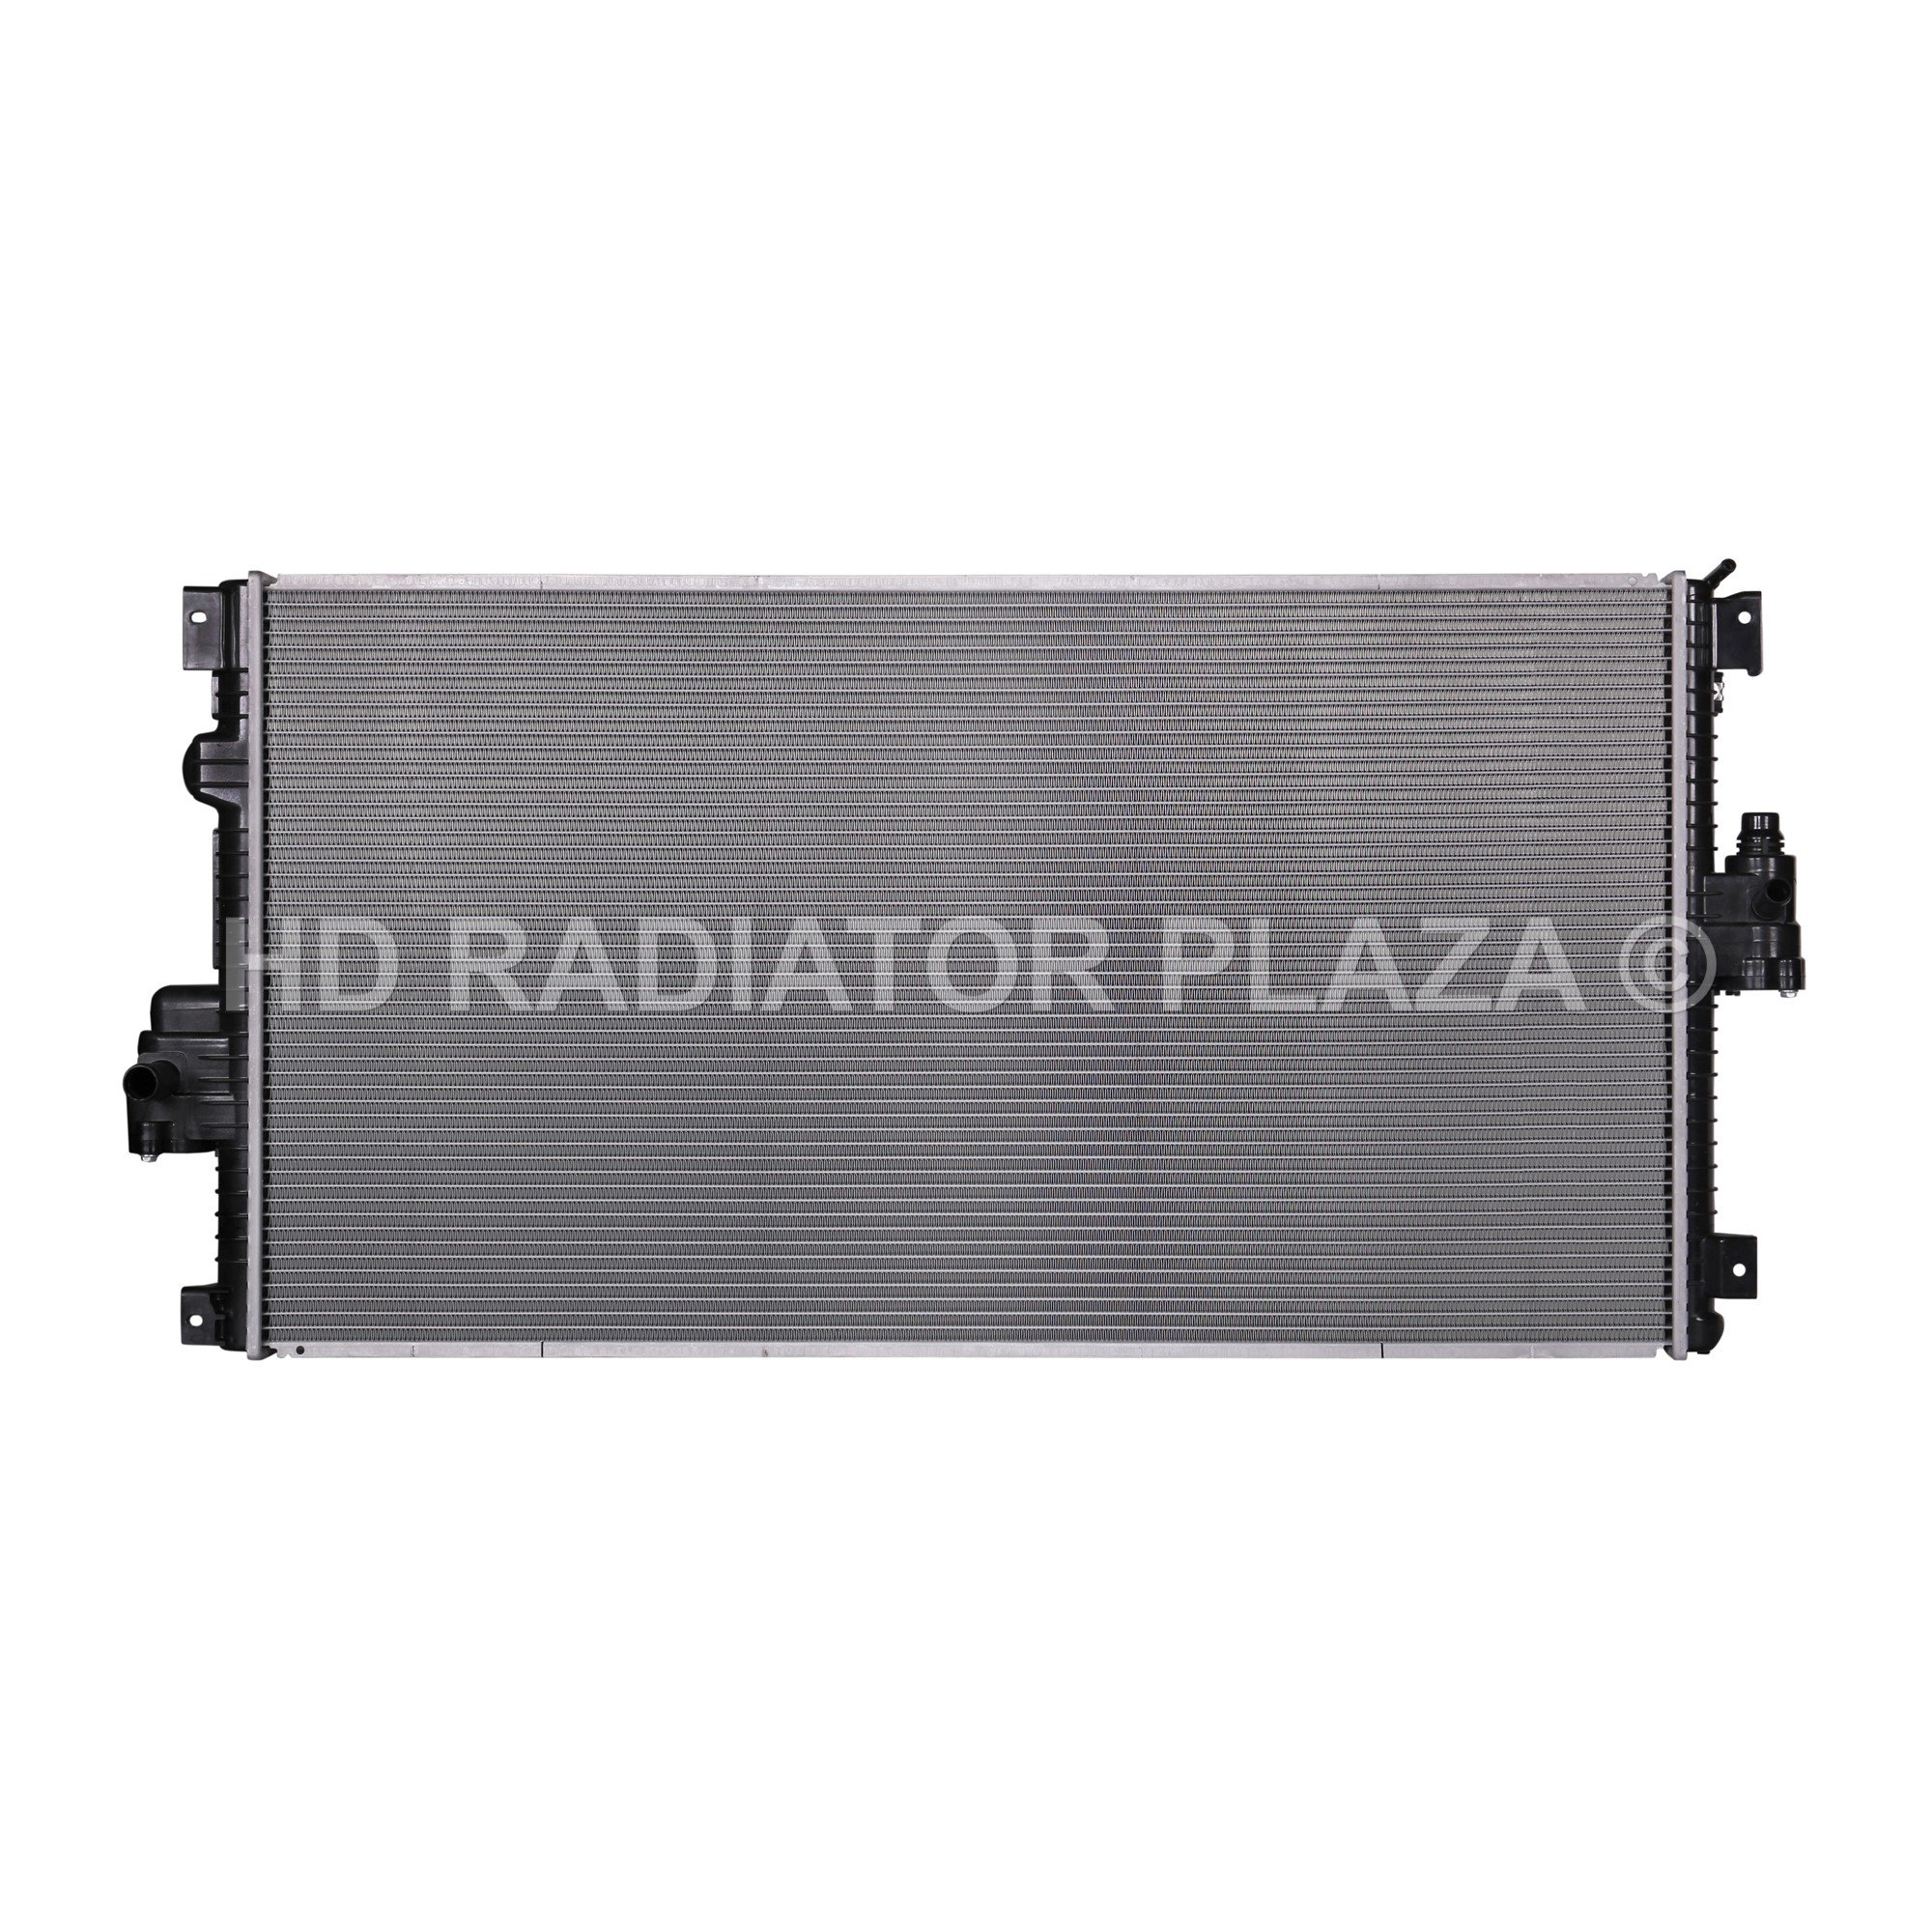 Radiator for 11-16 Ford F-Series Super Duty